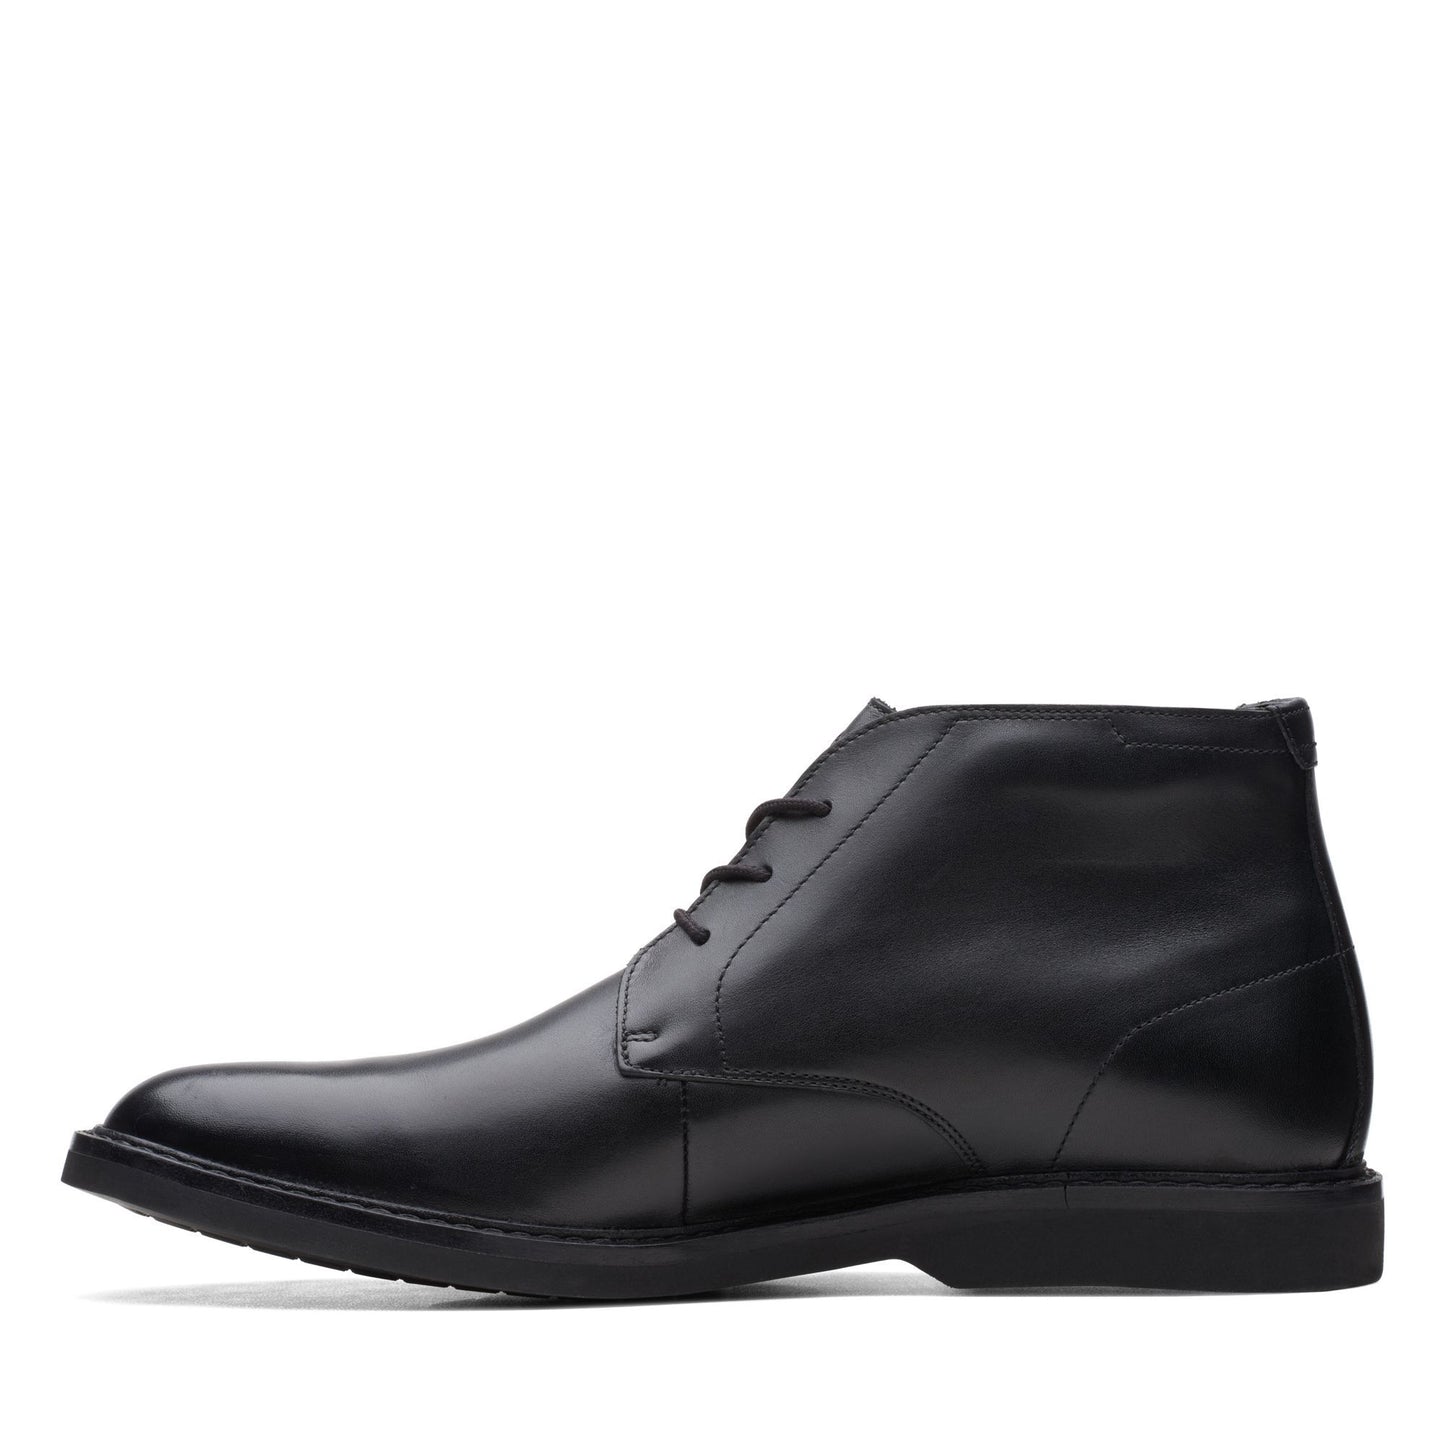 Clarks Atticus LTHIGTX Ankle Boots Black Leather